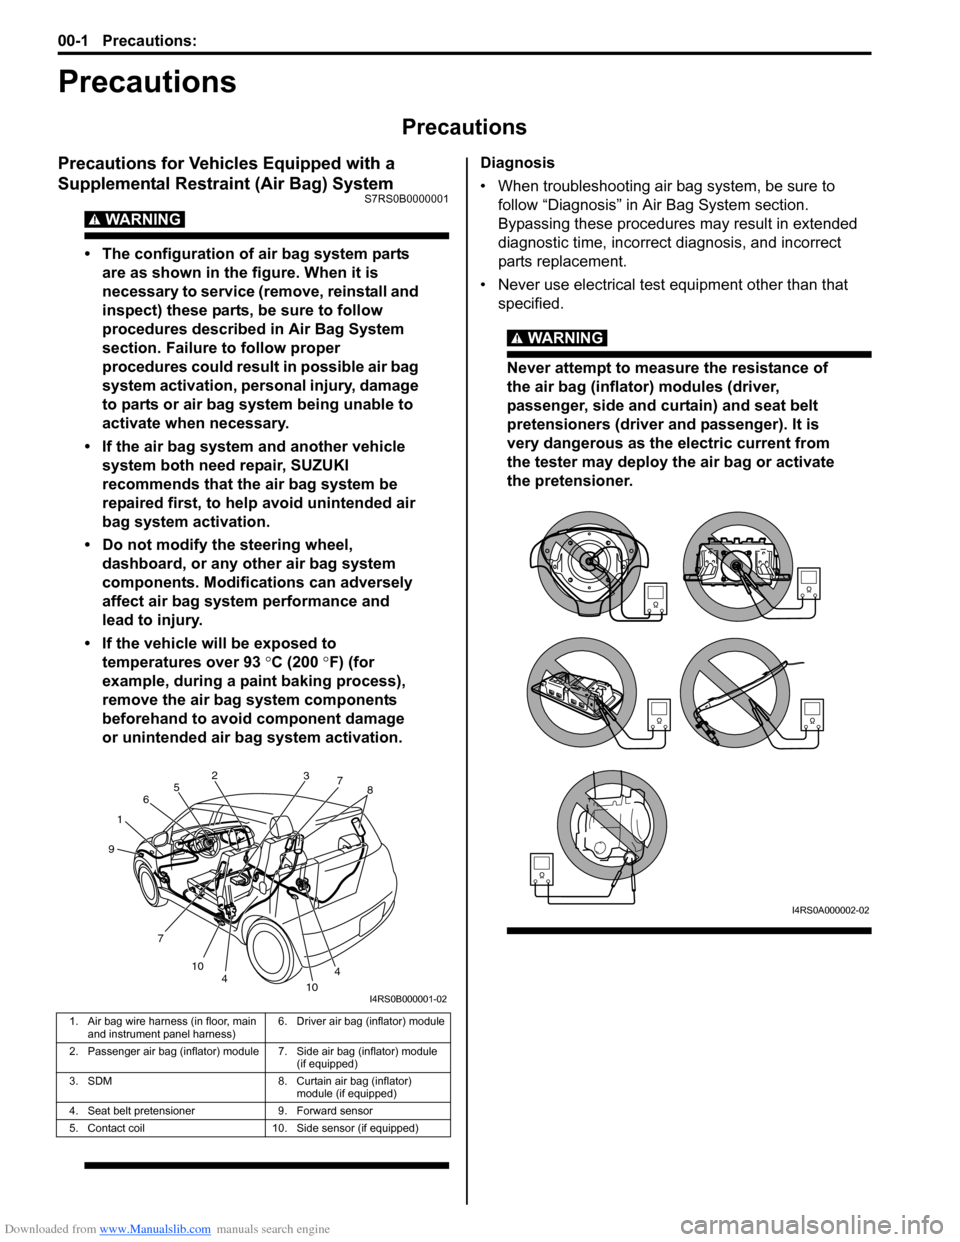 SUZUKI SWIFT 2005 2.G Service Workshop Manual Downloaded from www.Manualslib.com manuals search engine 00-1 Precautions: 
Precautions
Precautions
Precautions
Precautions for Vehicles Equipped with a 
Supplemental Restraint (Air Bag) System
S7RS0B